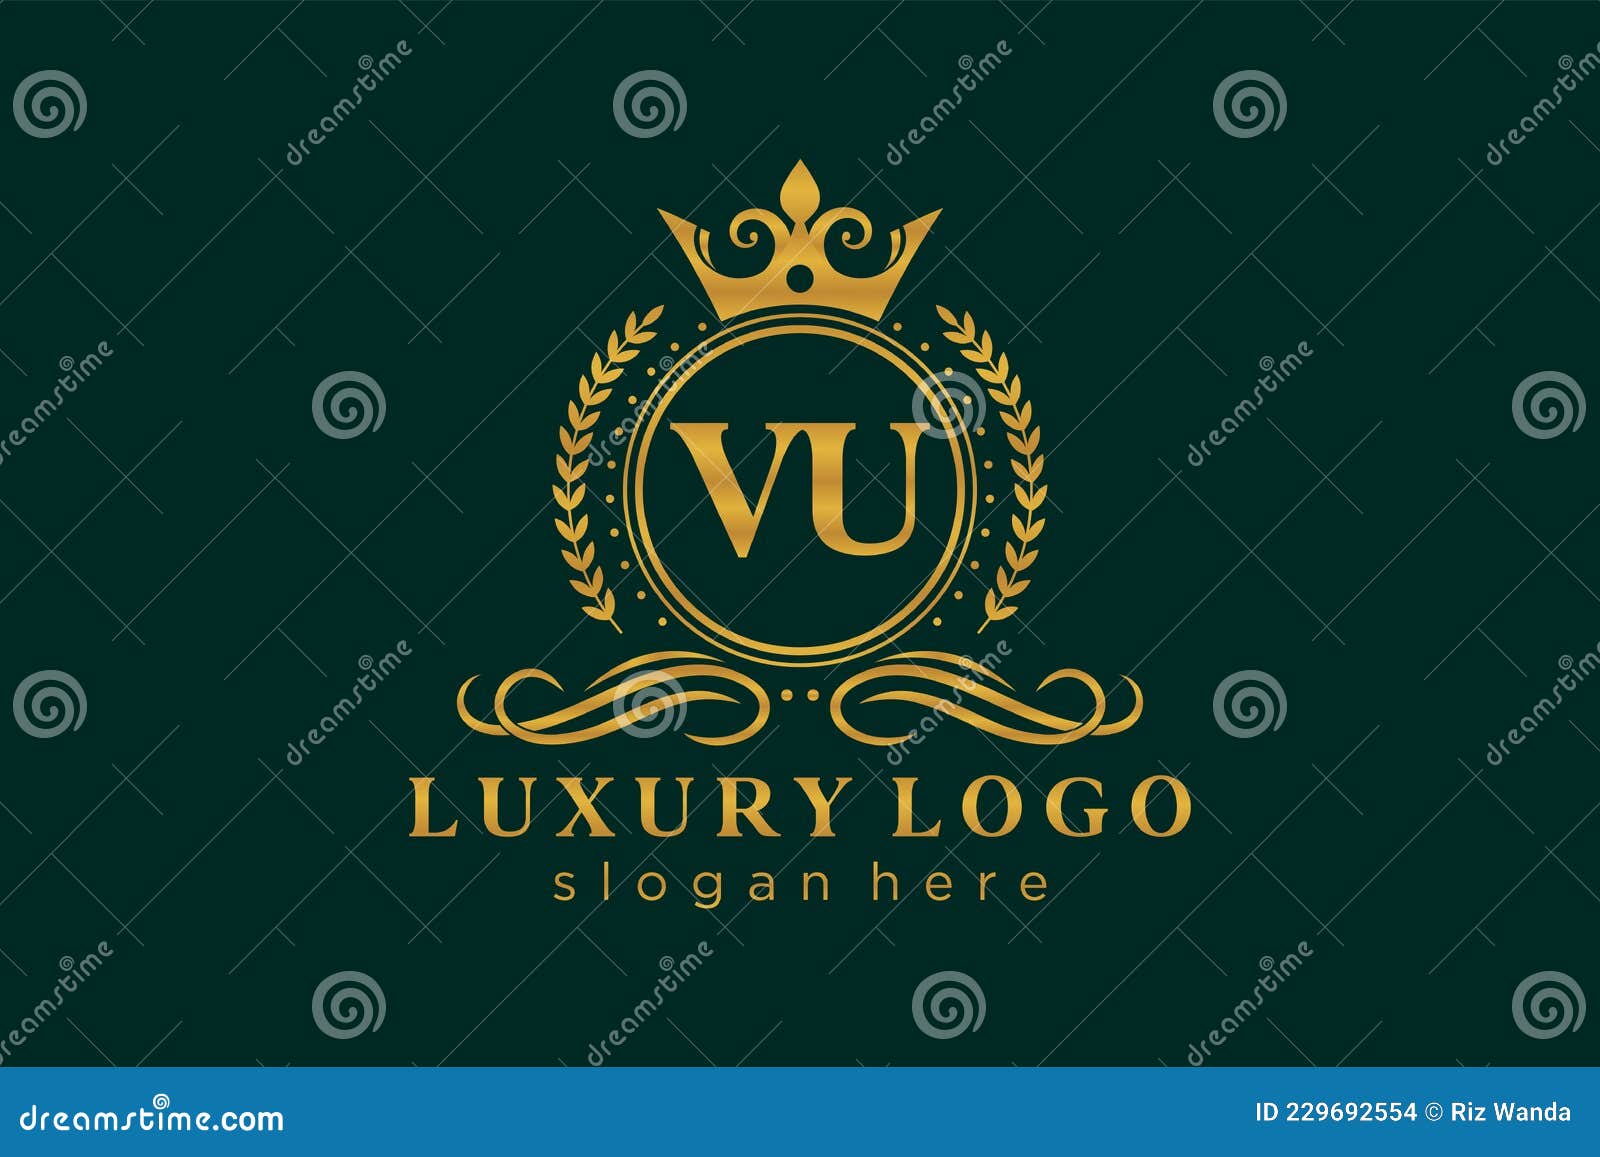 Initial Letter Logo VL Gold And White Color, With Stamp And Circle Object,  Vector Logo Design Template Elements For Your Business Or Company Identity.  Royalty Free SVG, Cliparts, Vectors, and Stock Illustration.